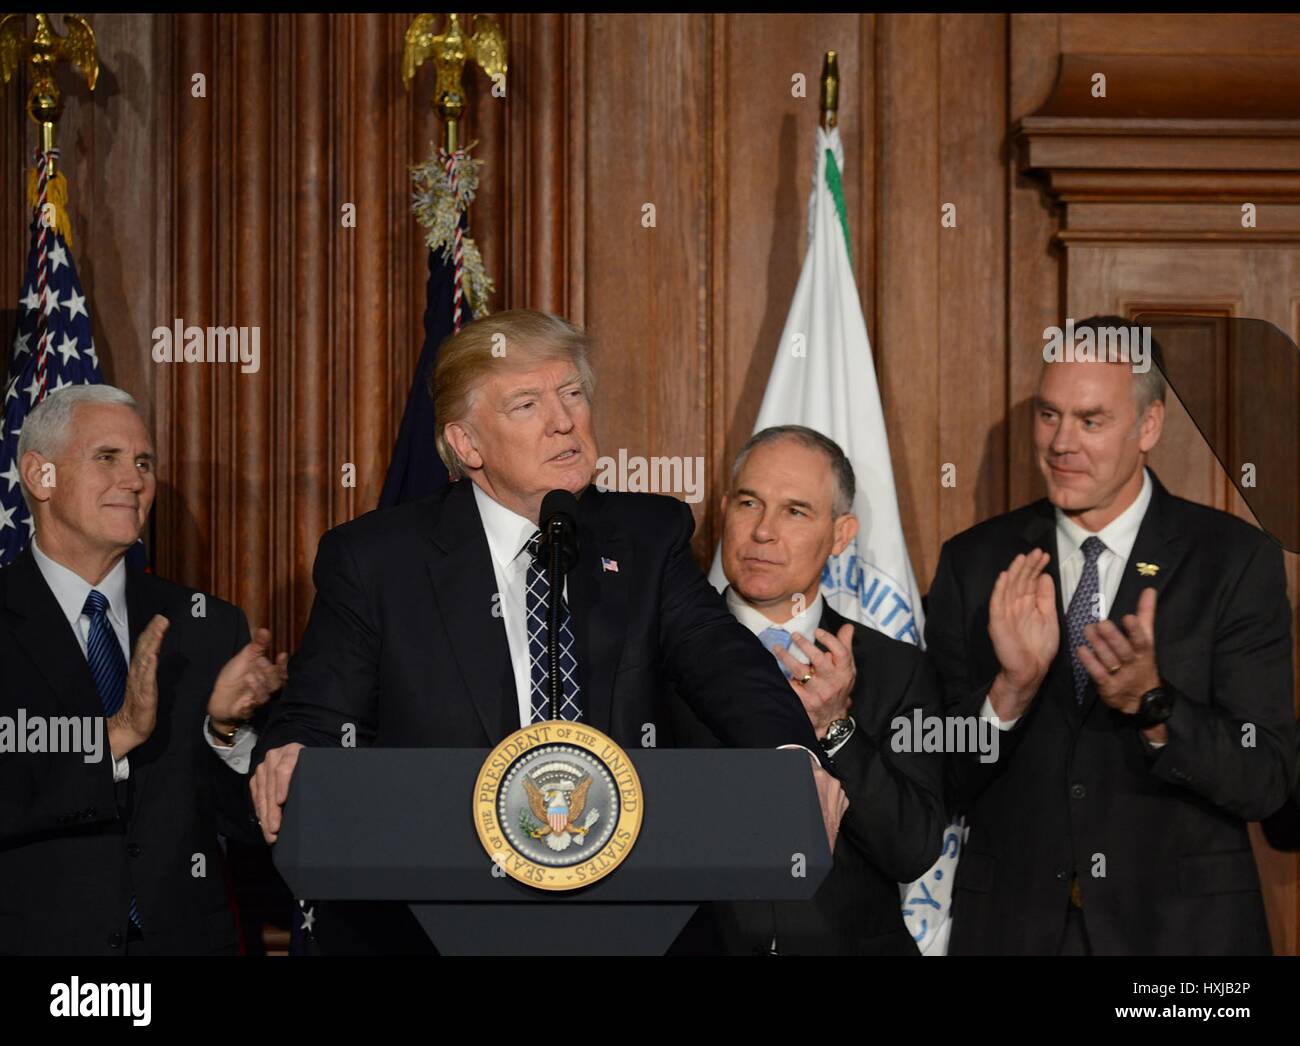 U.S. President Donald Trump smiles after signing the Energy Independence Executive Order at the Department of the Interior March 28, 2017 in Washington, DC. The order rolls back most of President Barack Obama's climate-change rules and environmental policies including the landmark Clean Power Plan. Stock Photo